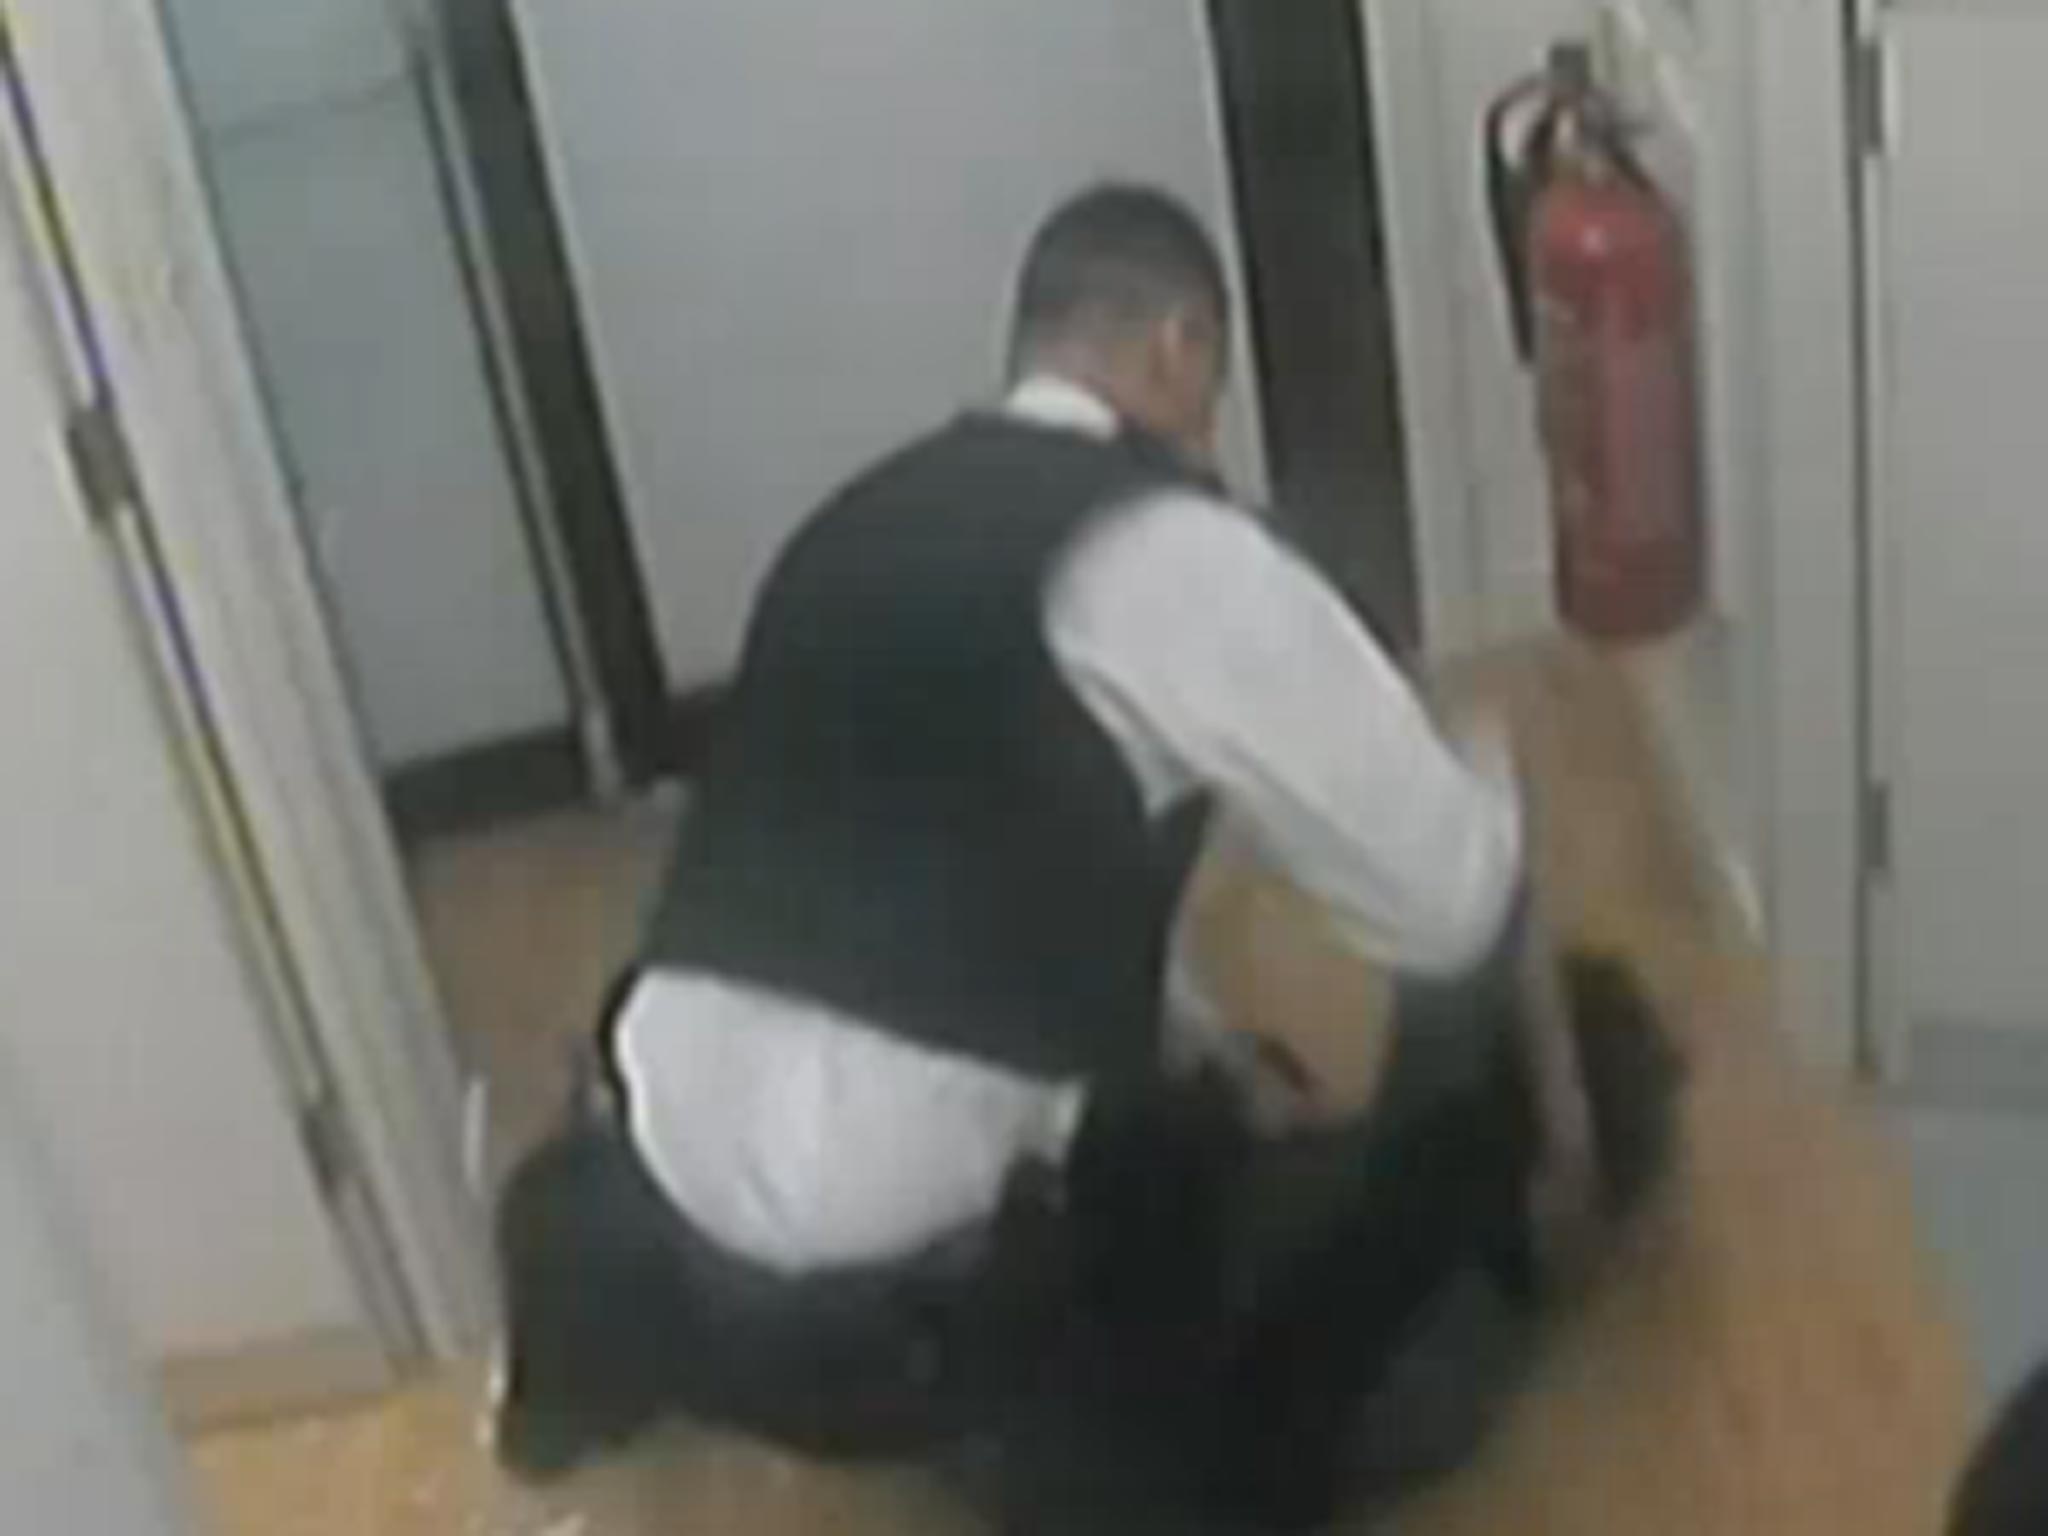 A shot from the CCTV shows the officer punch the woman